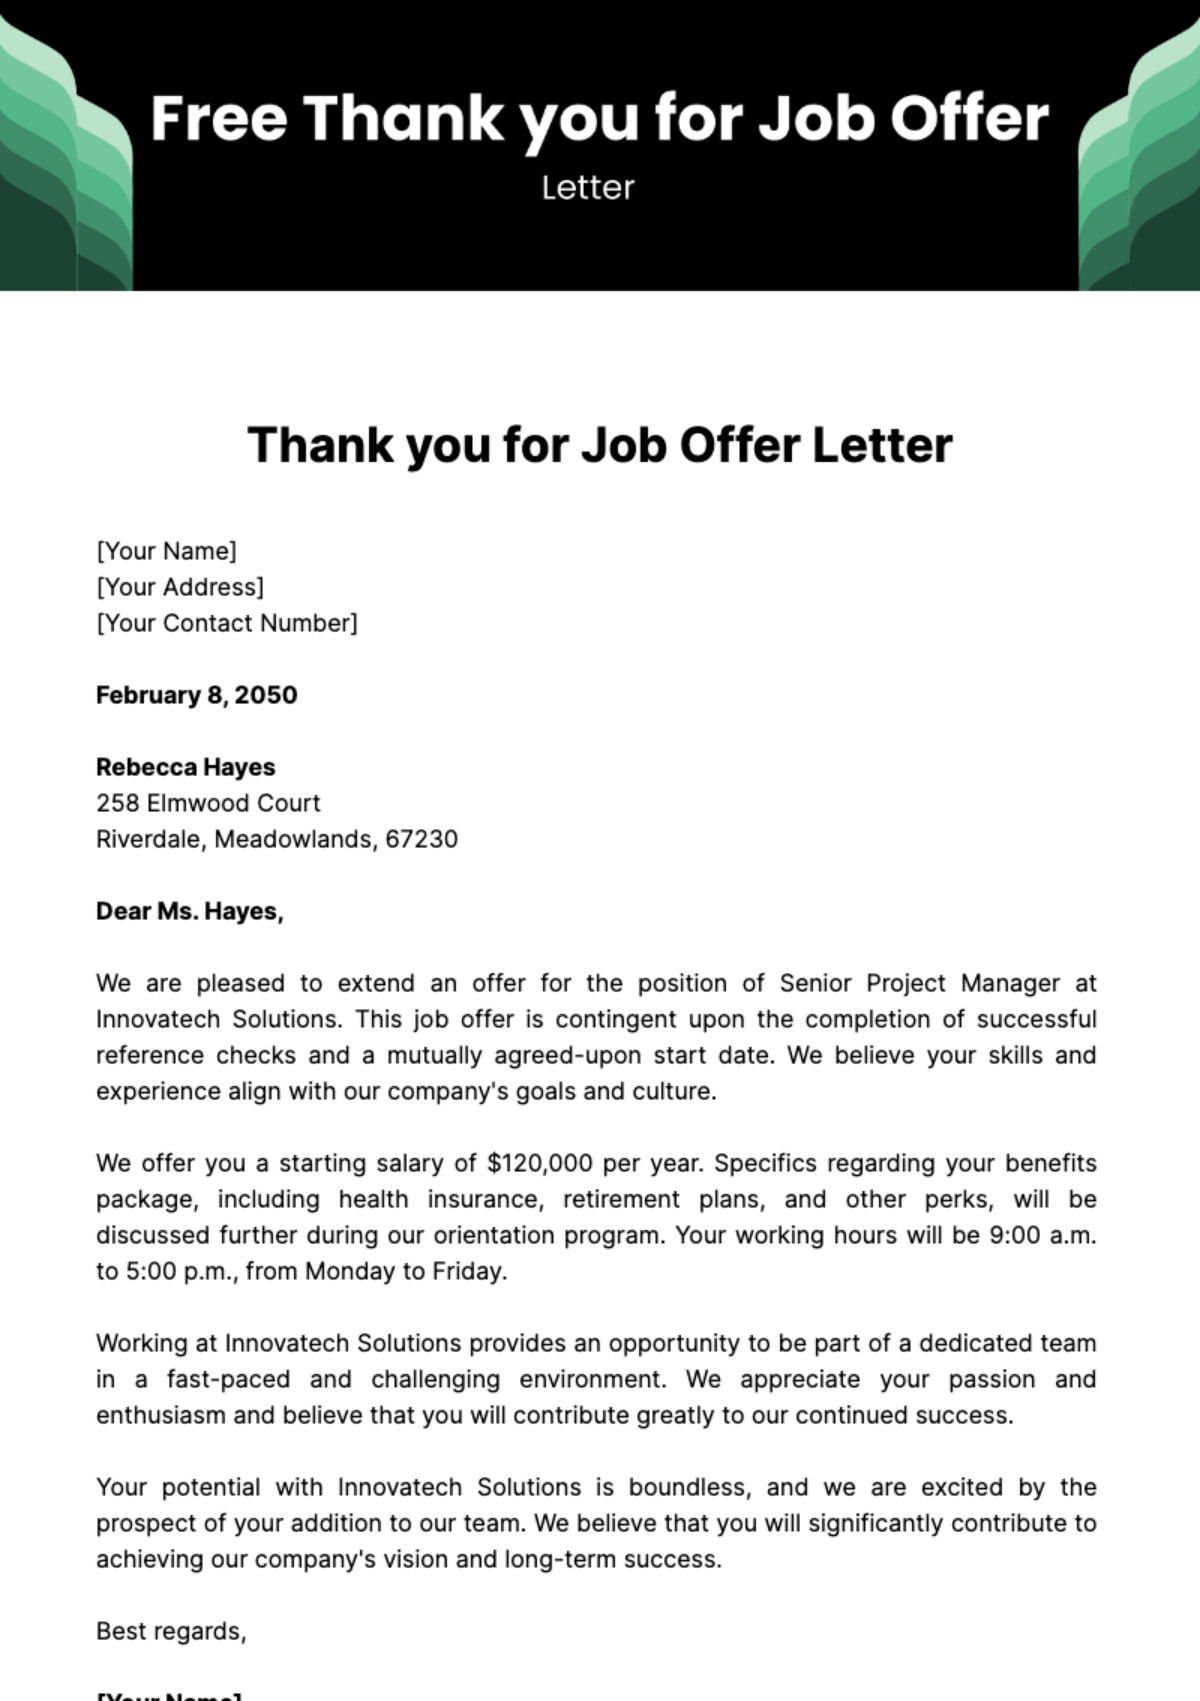 Free Thank you for Job Offer Letter Template